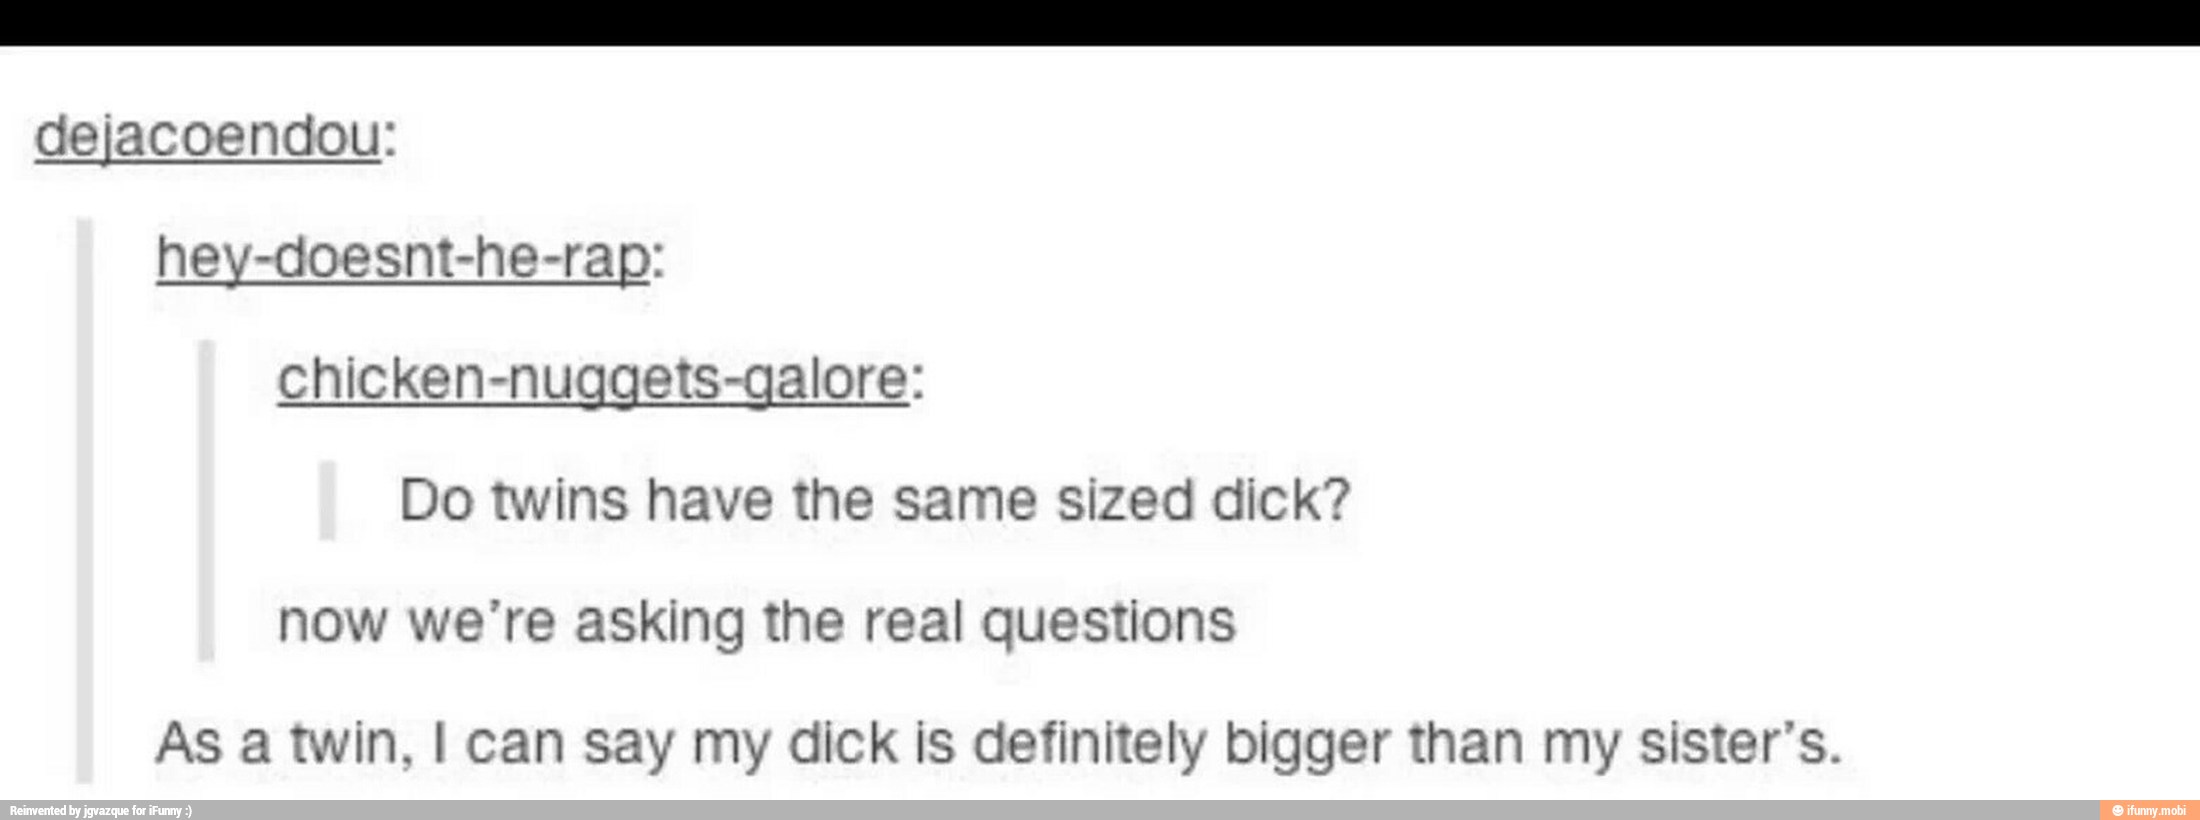 Does twins have the same size dick